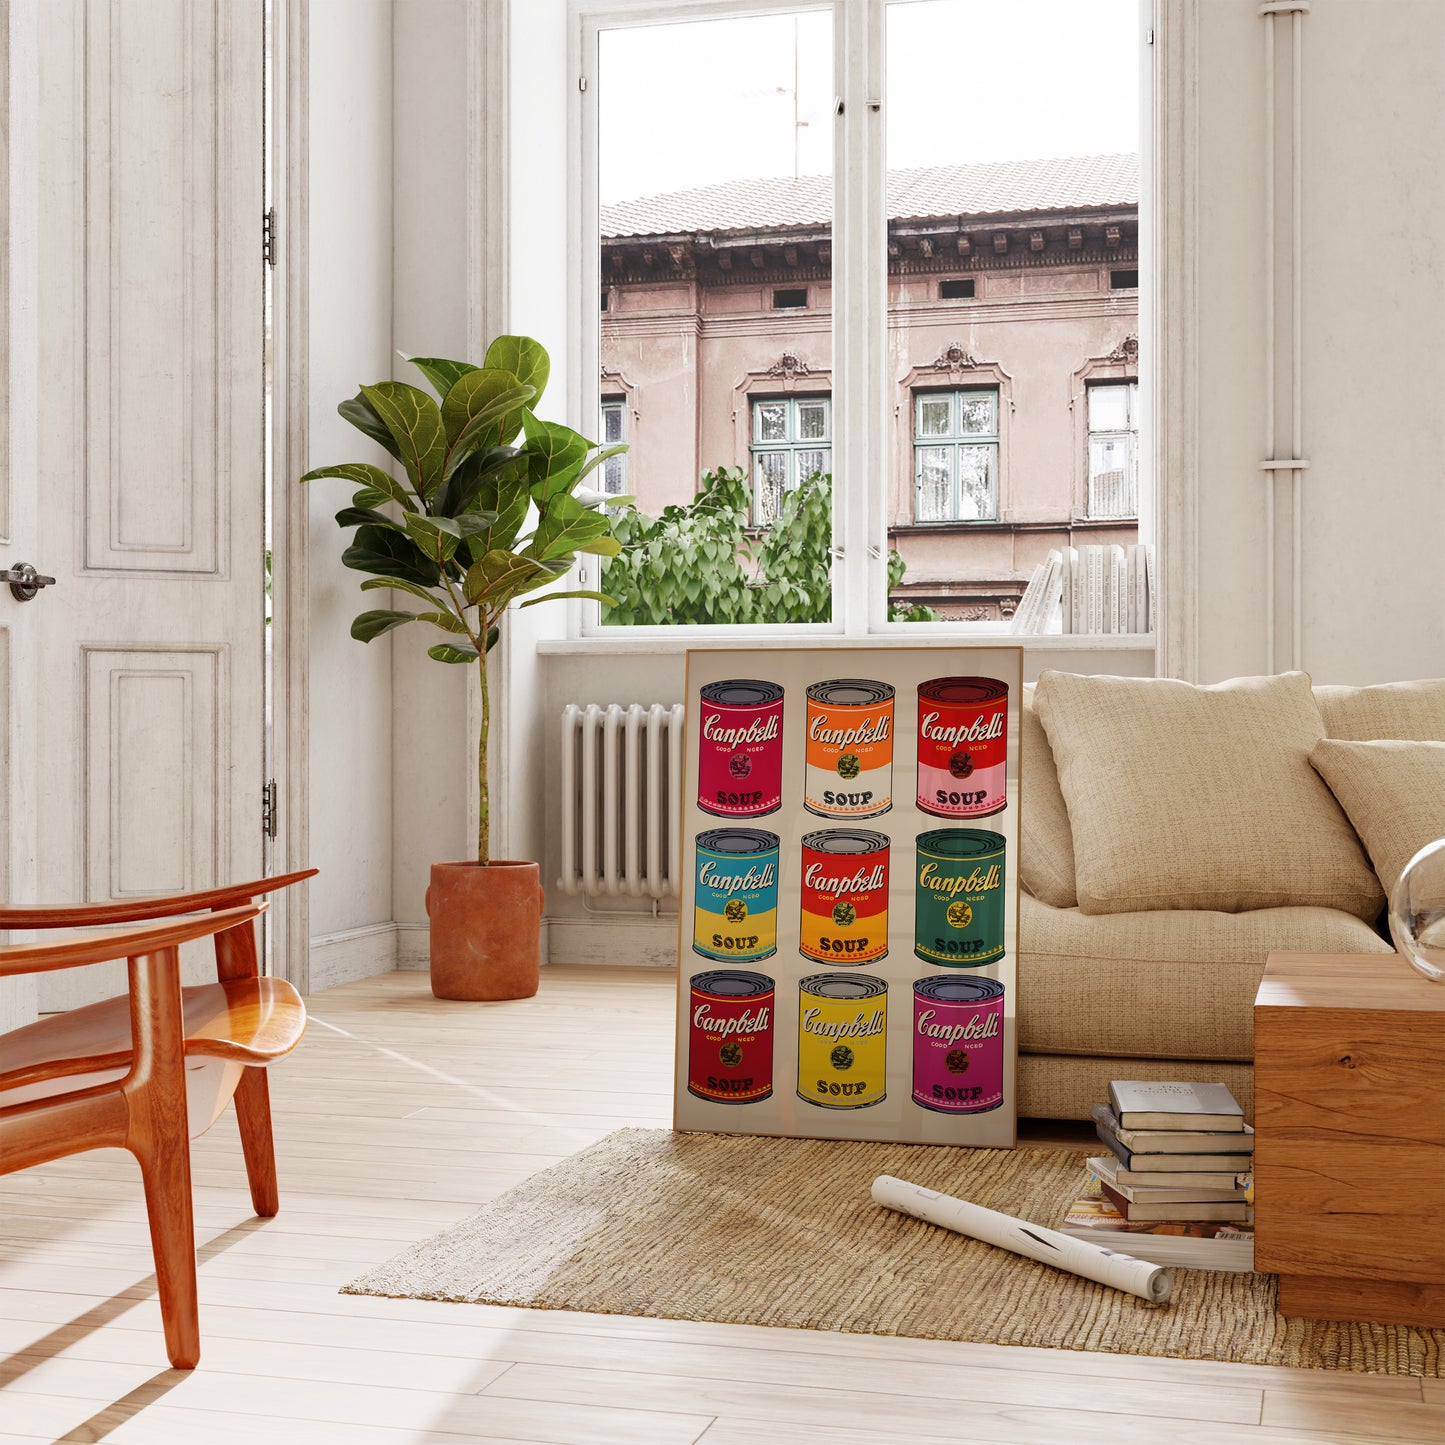 Bright living room with Andy Warhol's Campbell's Soup Cans prints and stylish furniture.